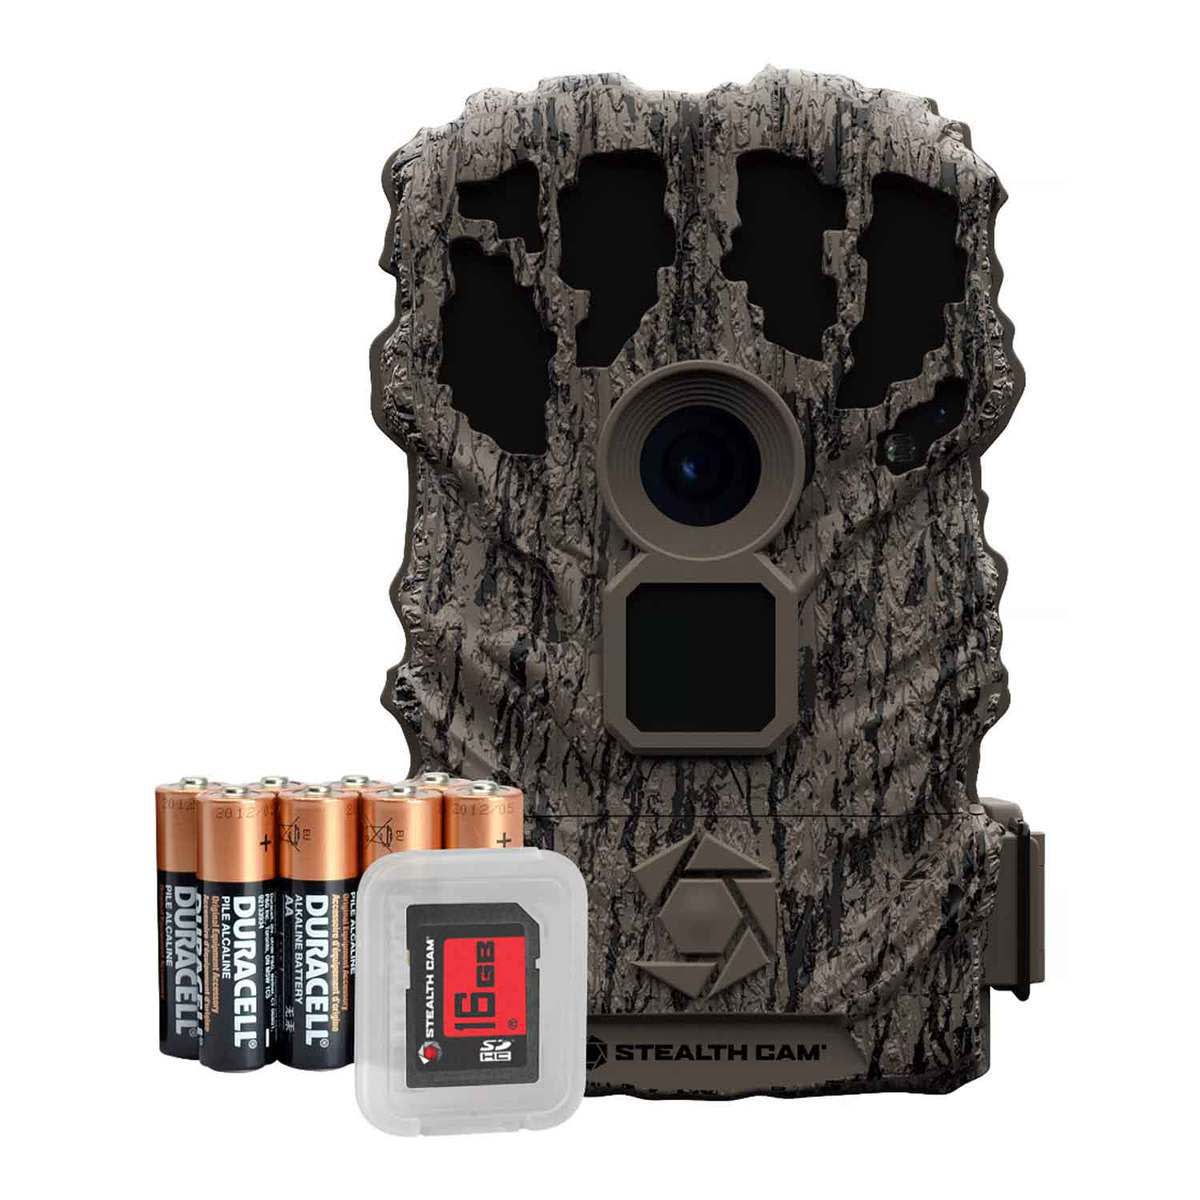 Stealth Cam Browtine 14 Megapixel Trail Camera Combo - $34.99